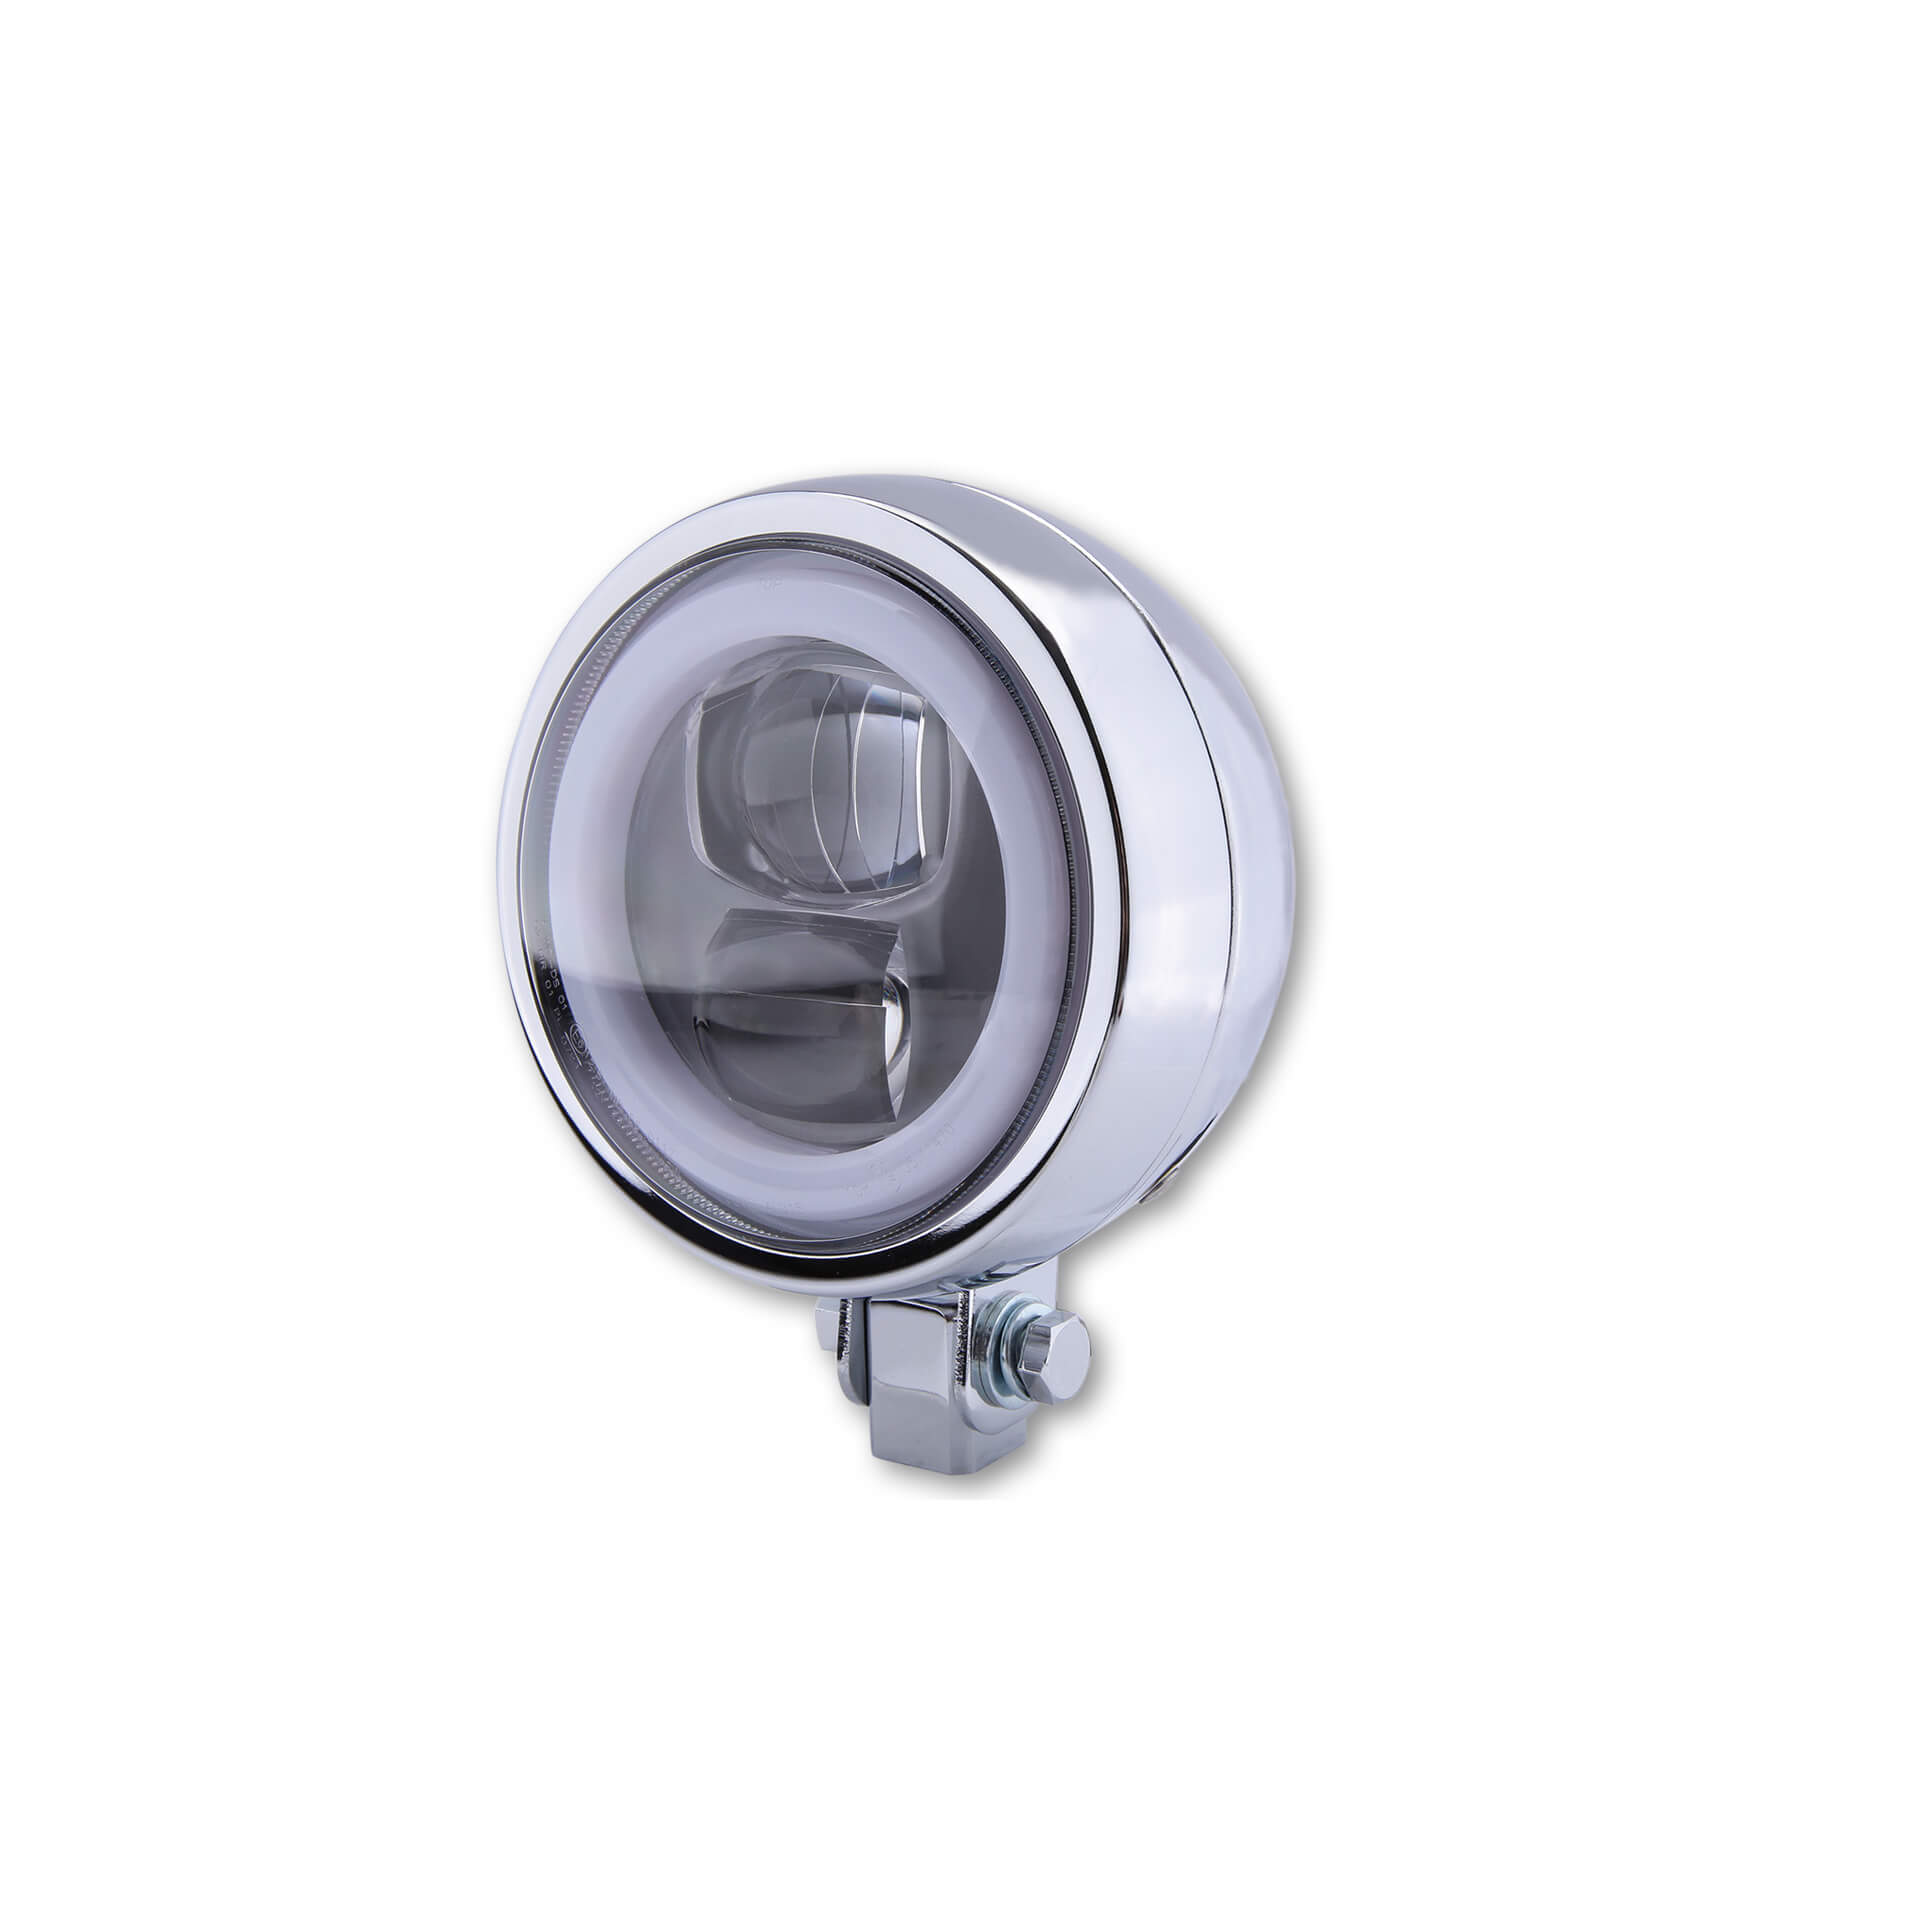 HIGHSIDER LED spotlight FLAT TYP 9 with parking light ring, chrome, lower mounting, silver, silver Silver unisex